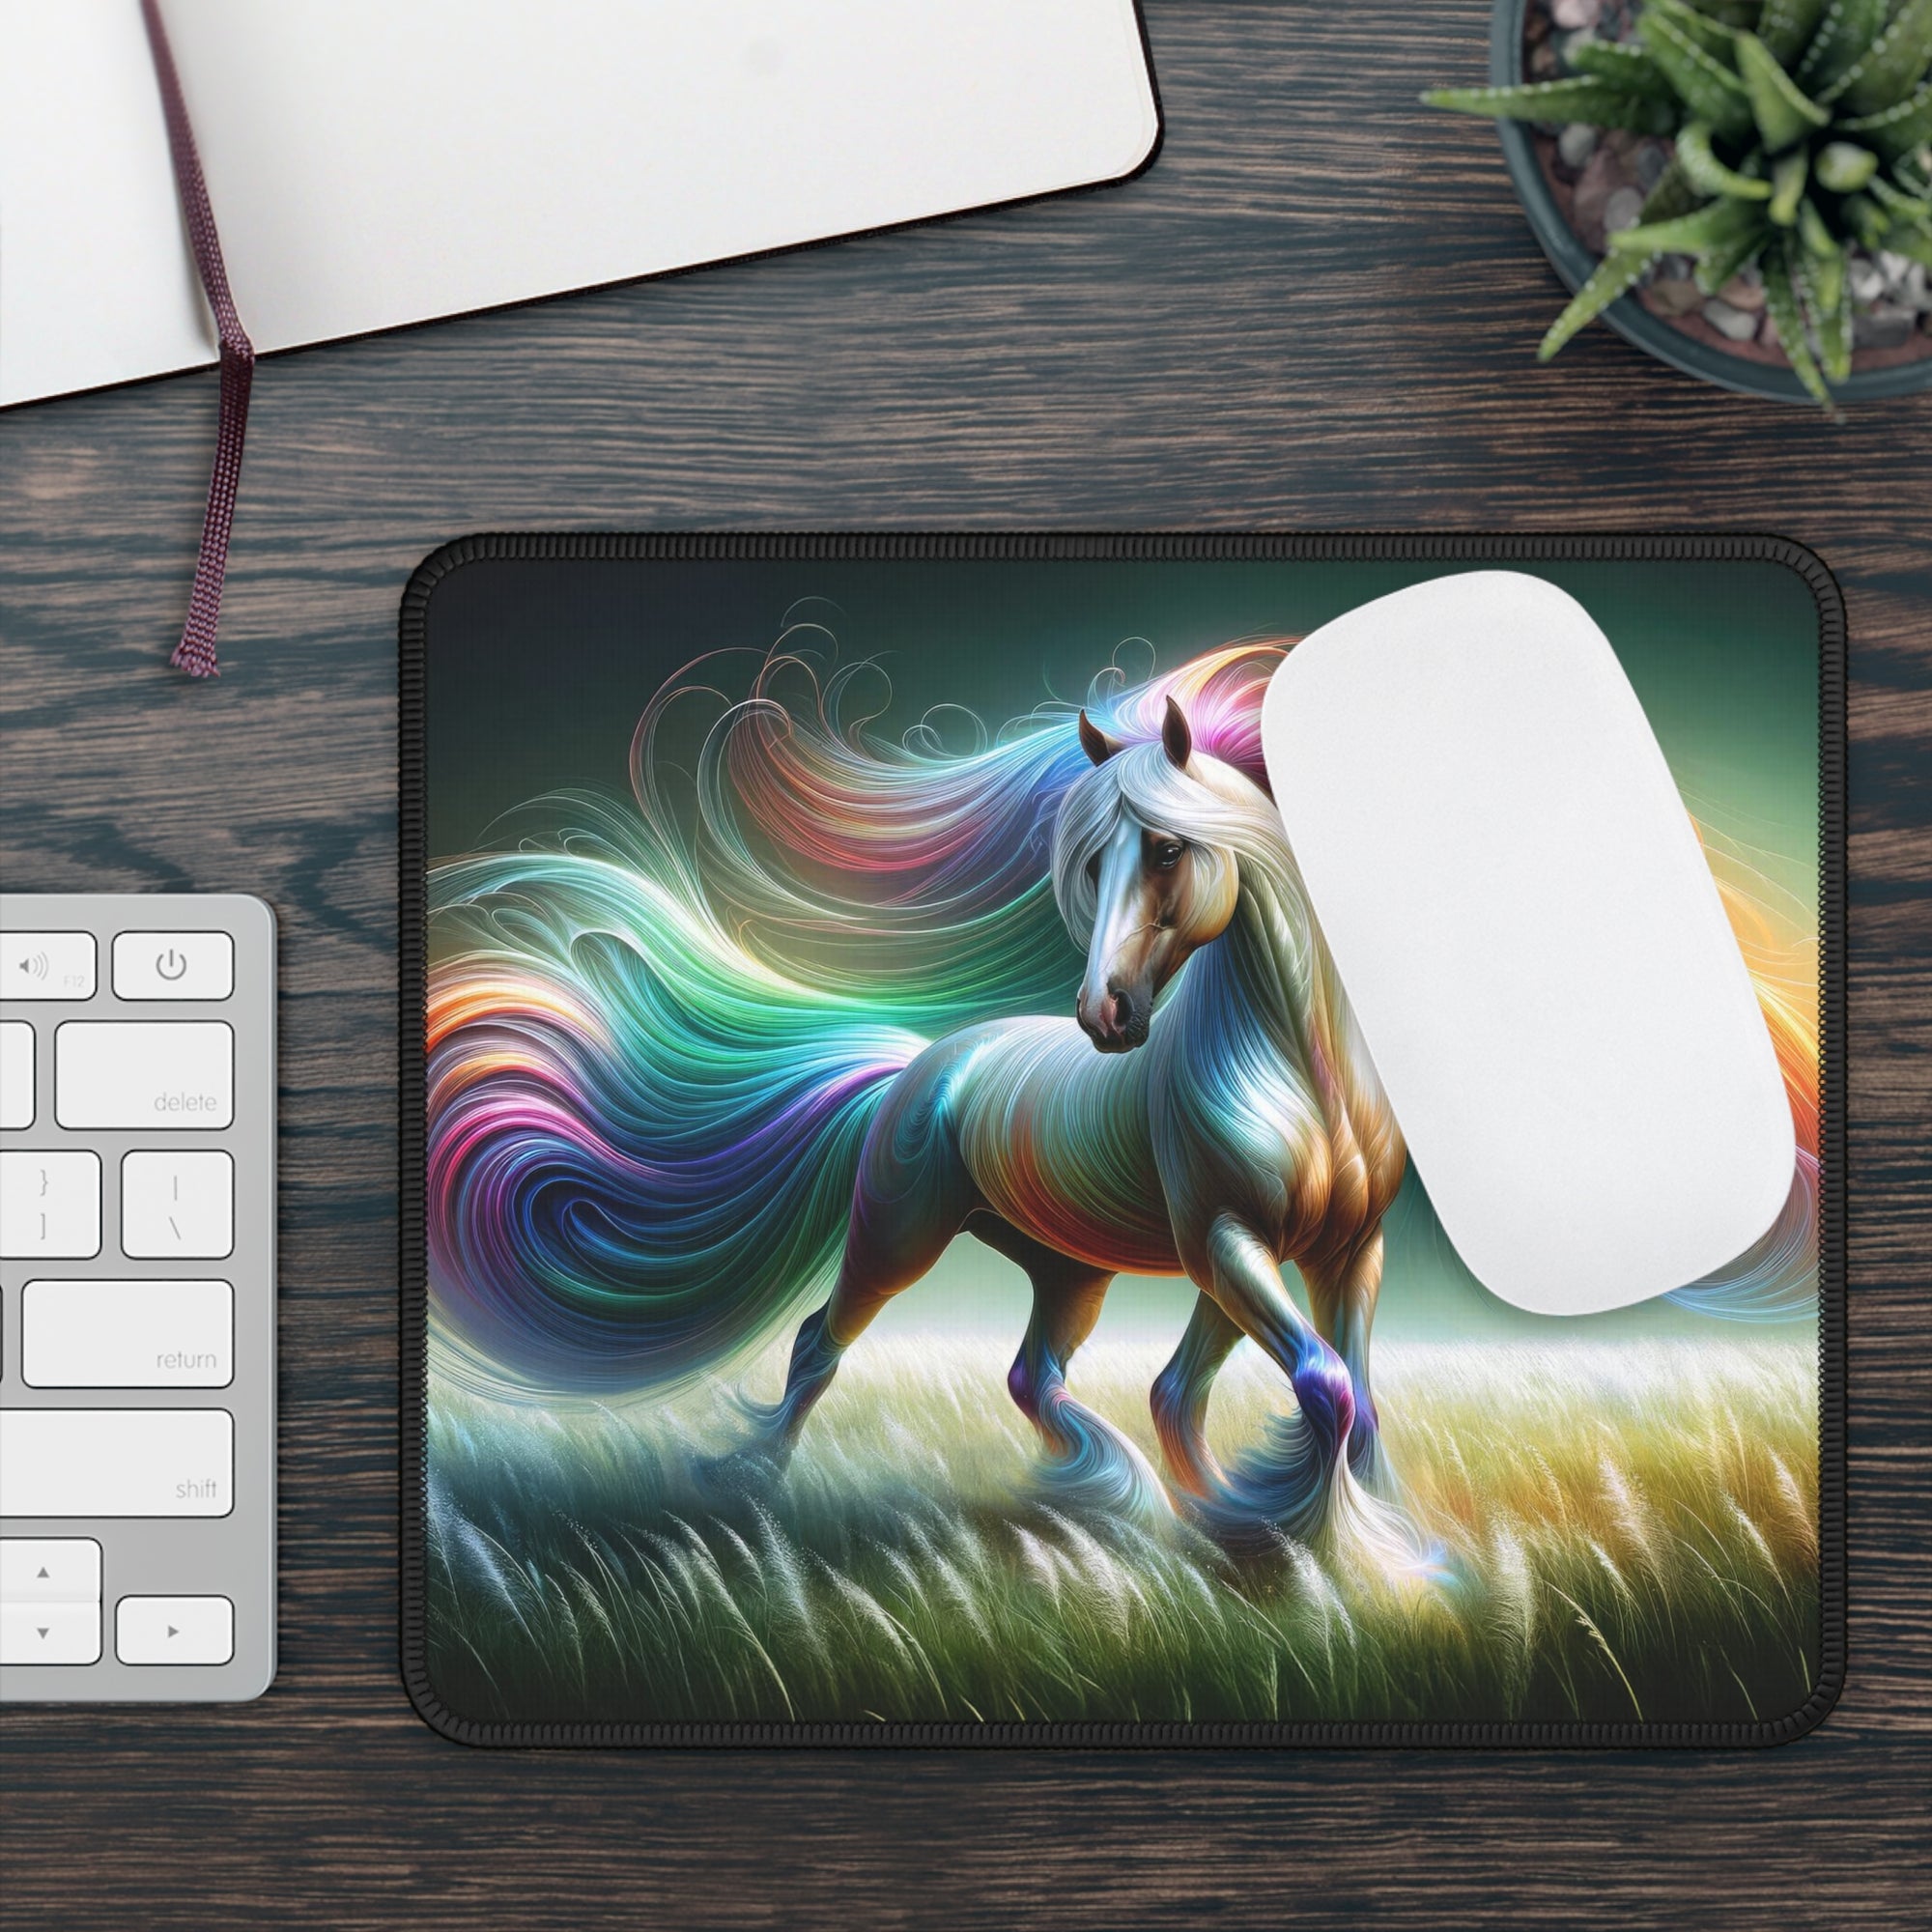 Spectral Serenade Gaming Mouse Pad